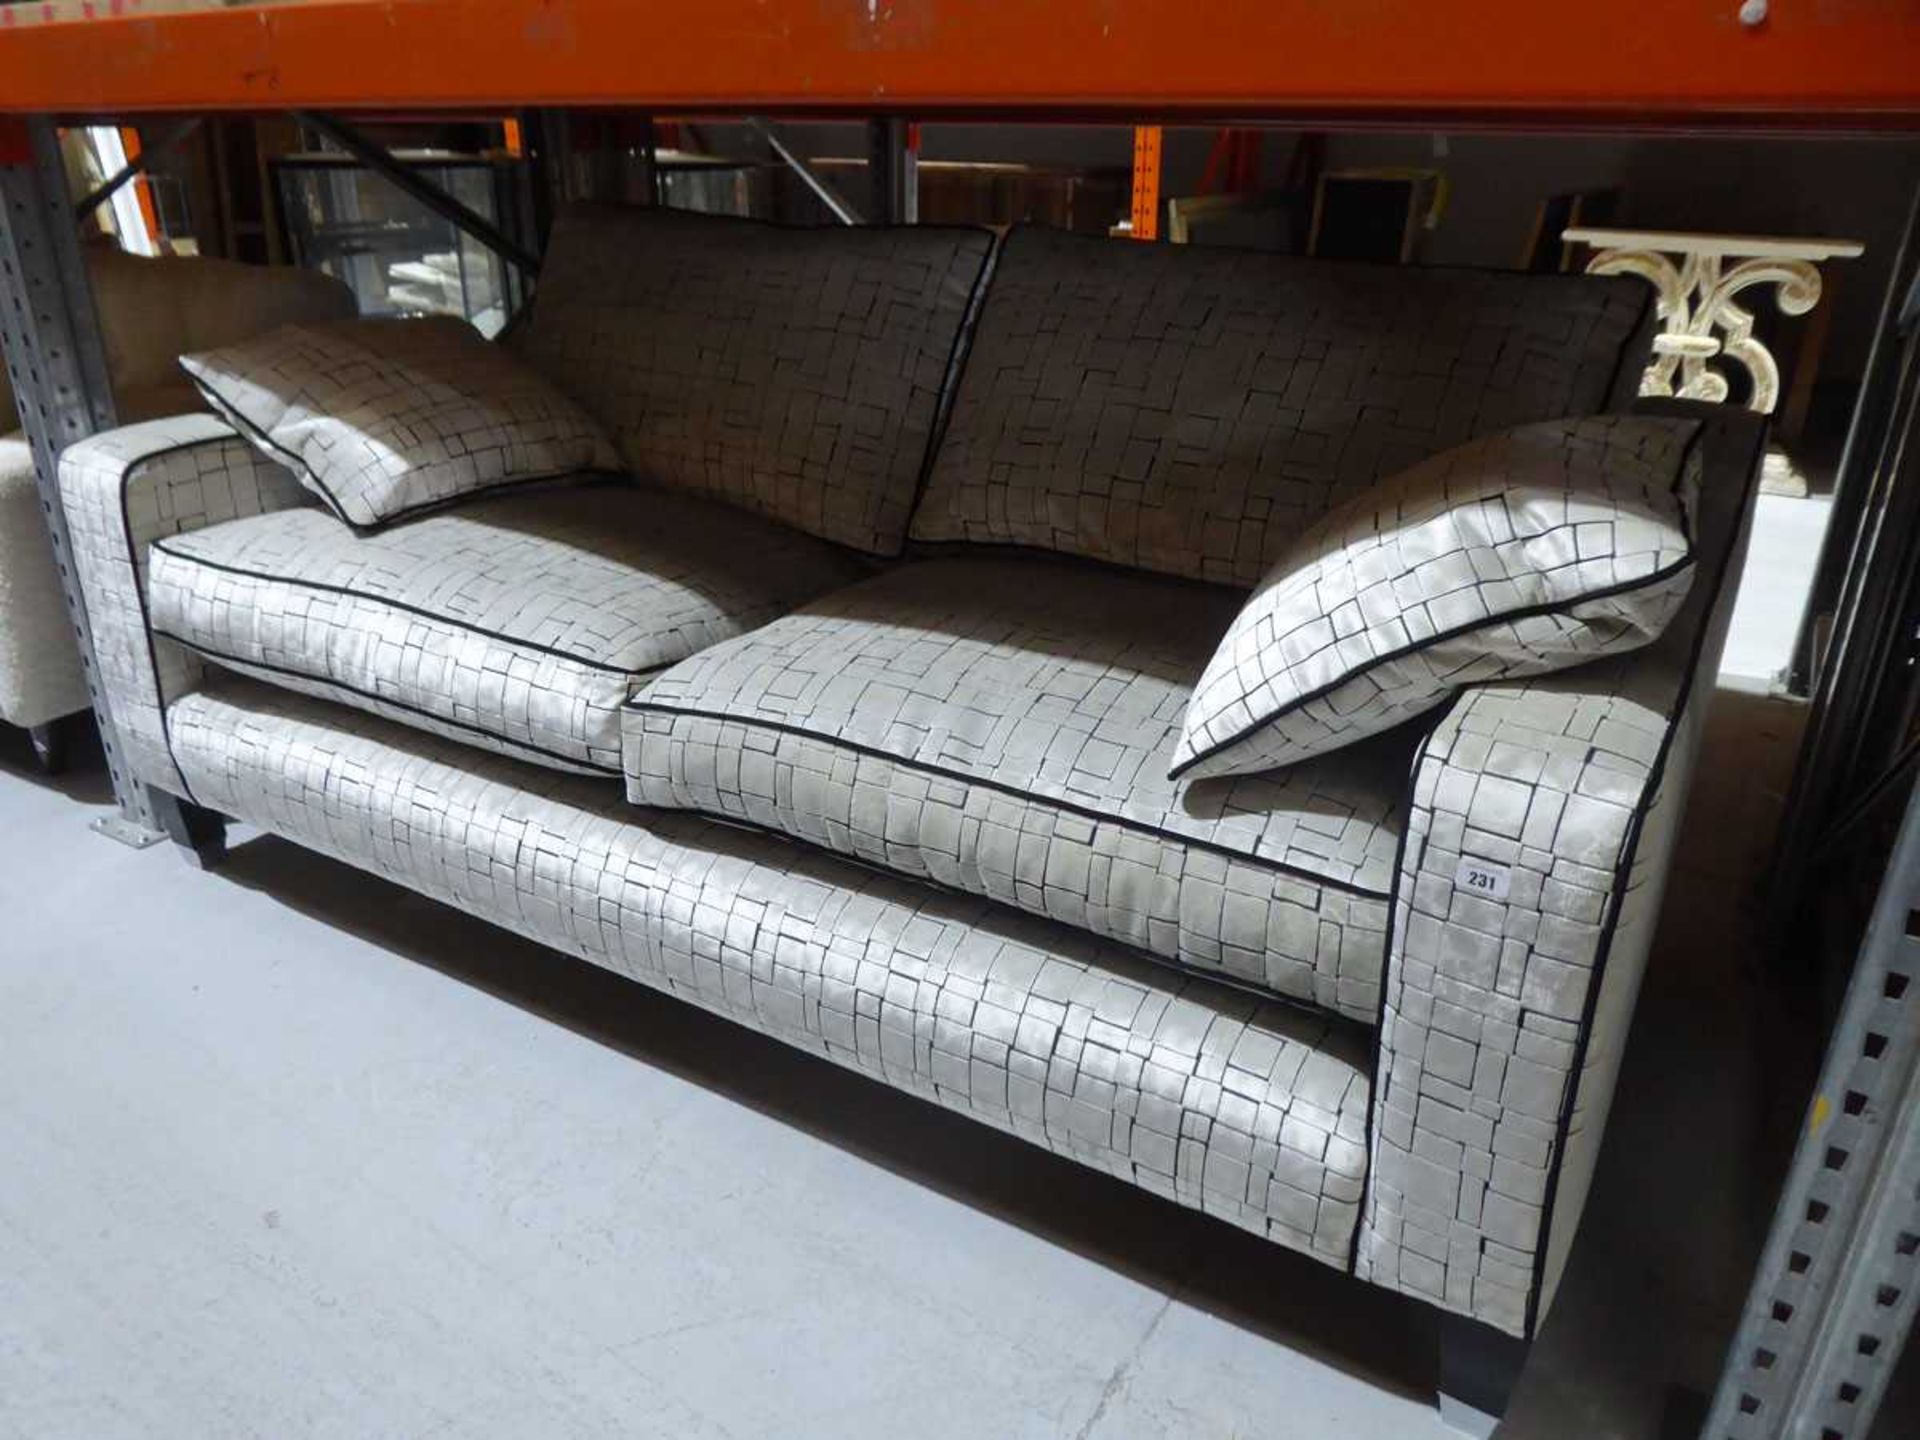 +VAT Large 2 seater sofa in black and silvered patttern material with 2 scatter cushions